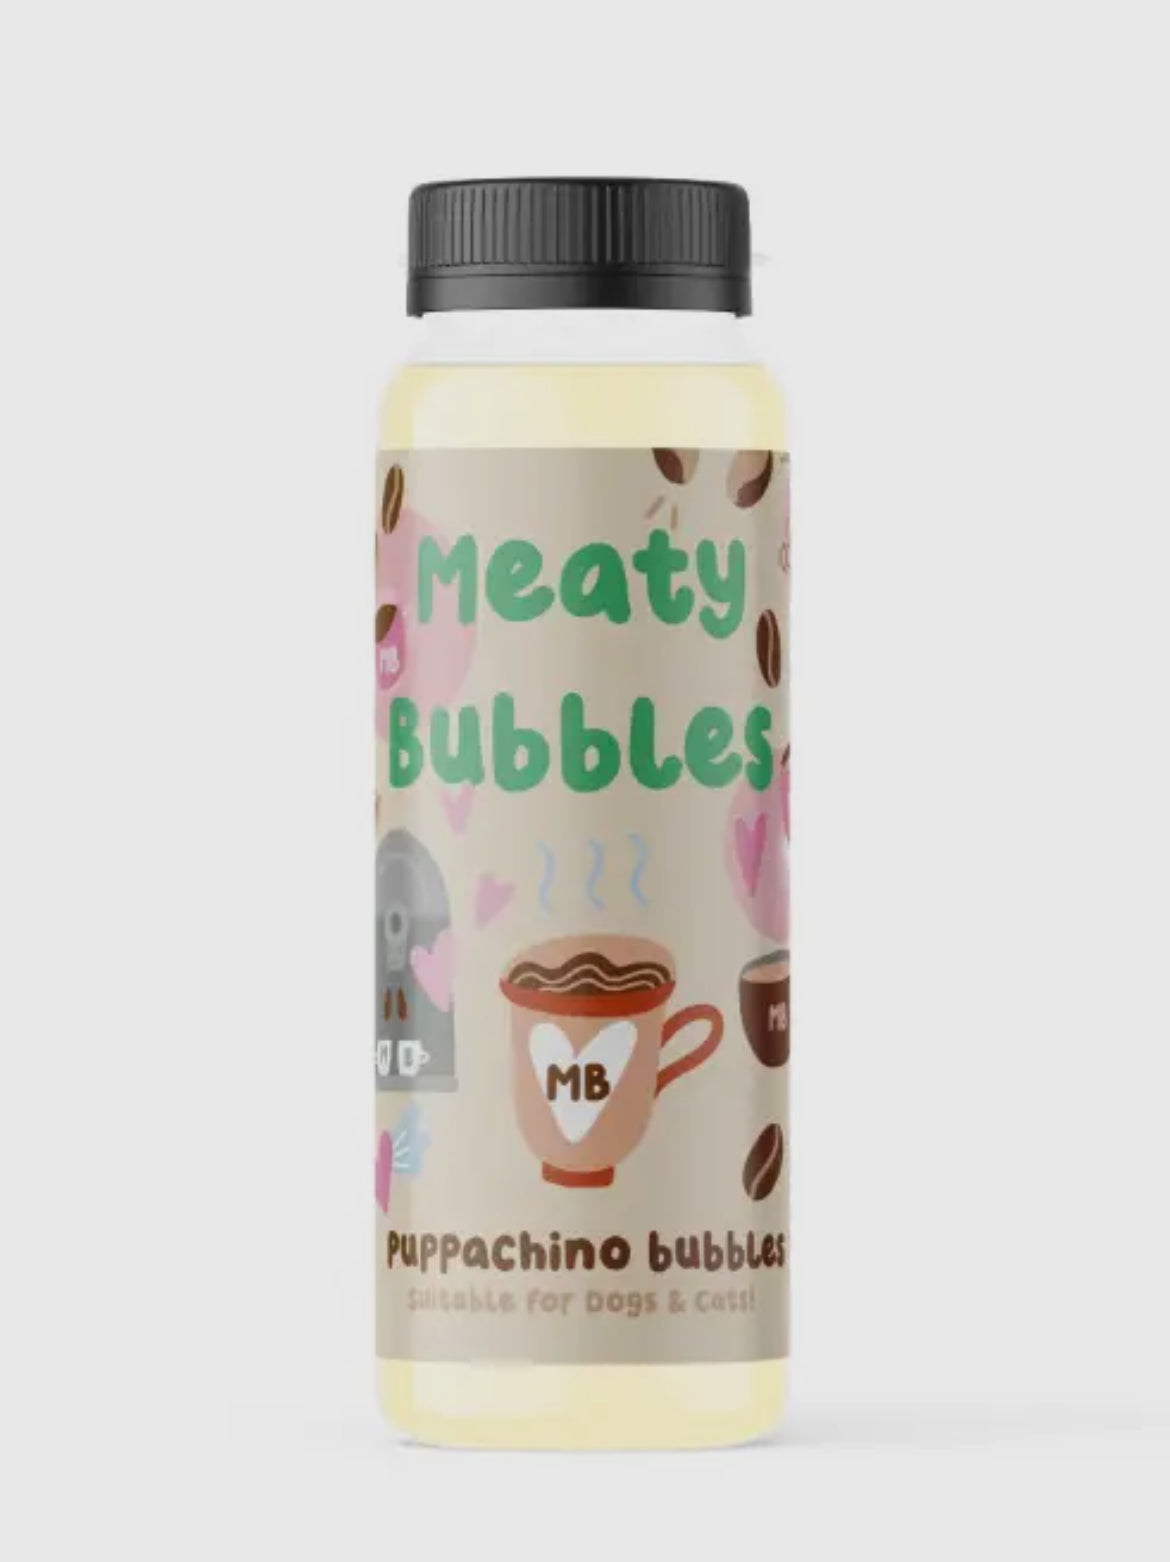 Meaty Bubbles for Cats & Dogs, 150 ml